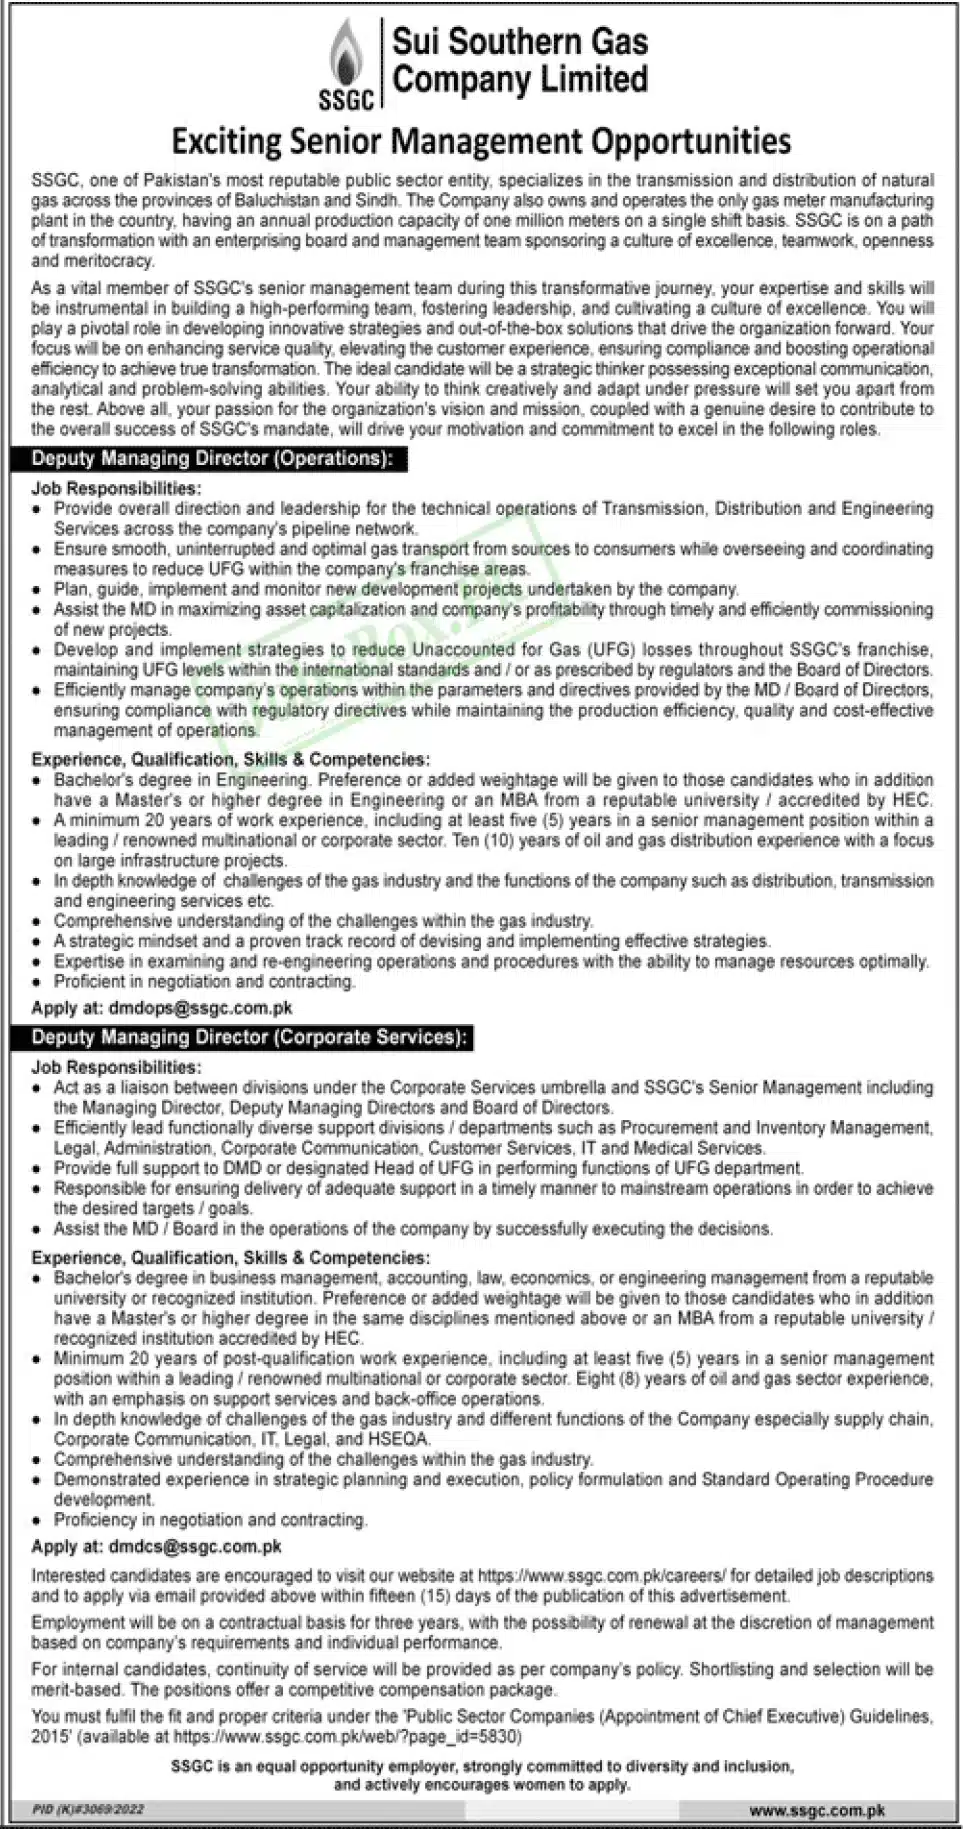 SSGC Jobs 2023 – Sui Southern Gas Company Jobs 2023